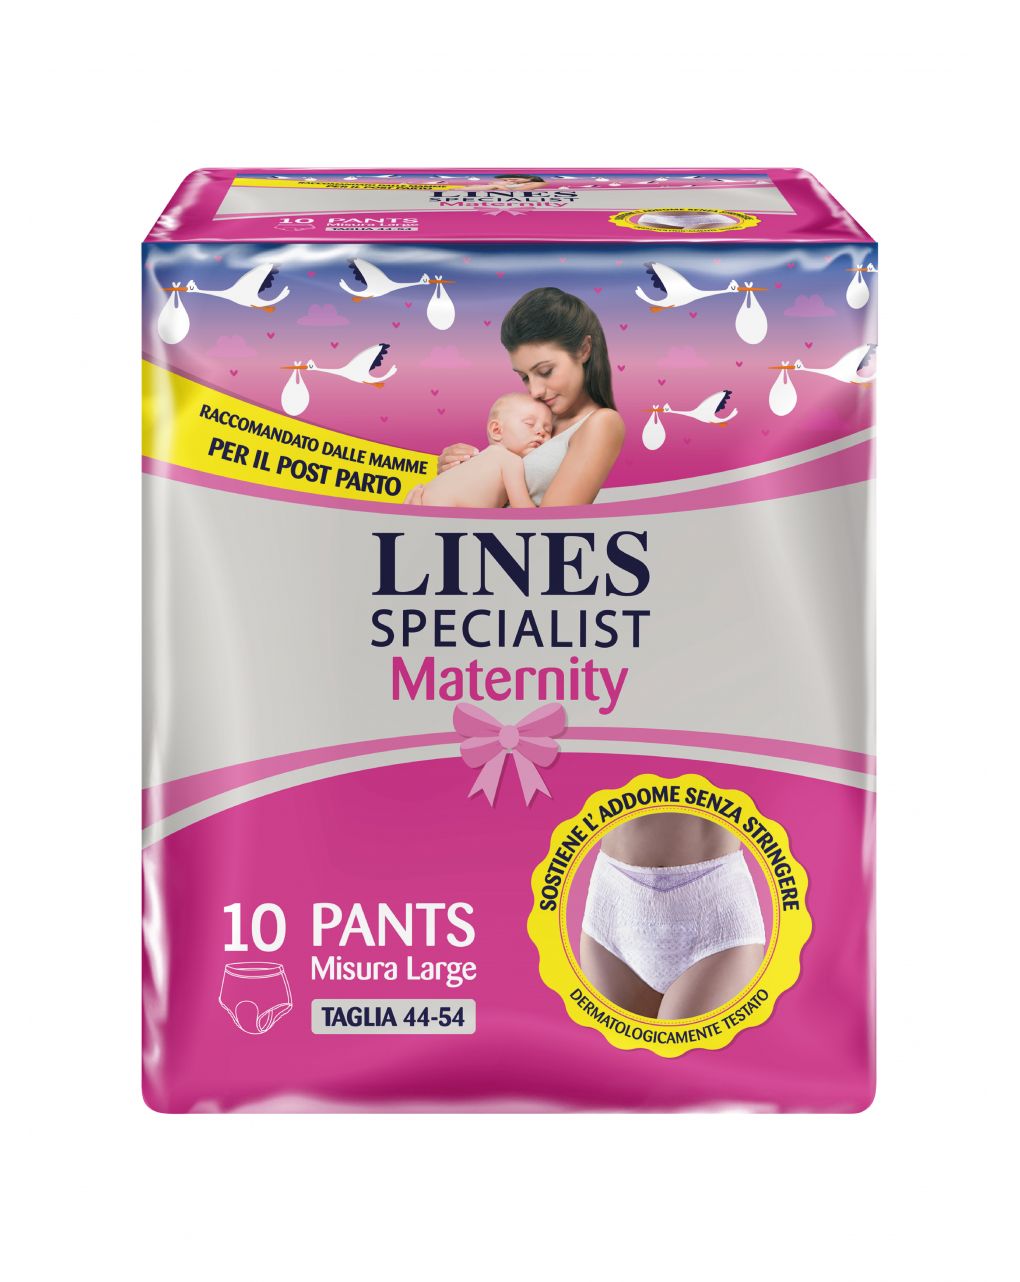 Lines specialist - lines specialist maternity lx10 - Lines